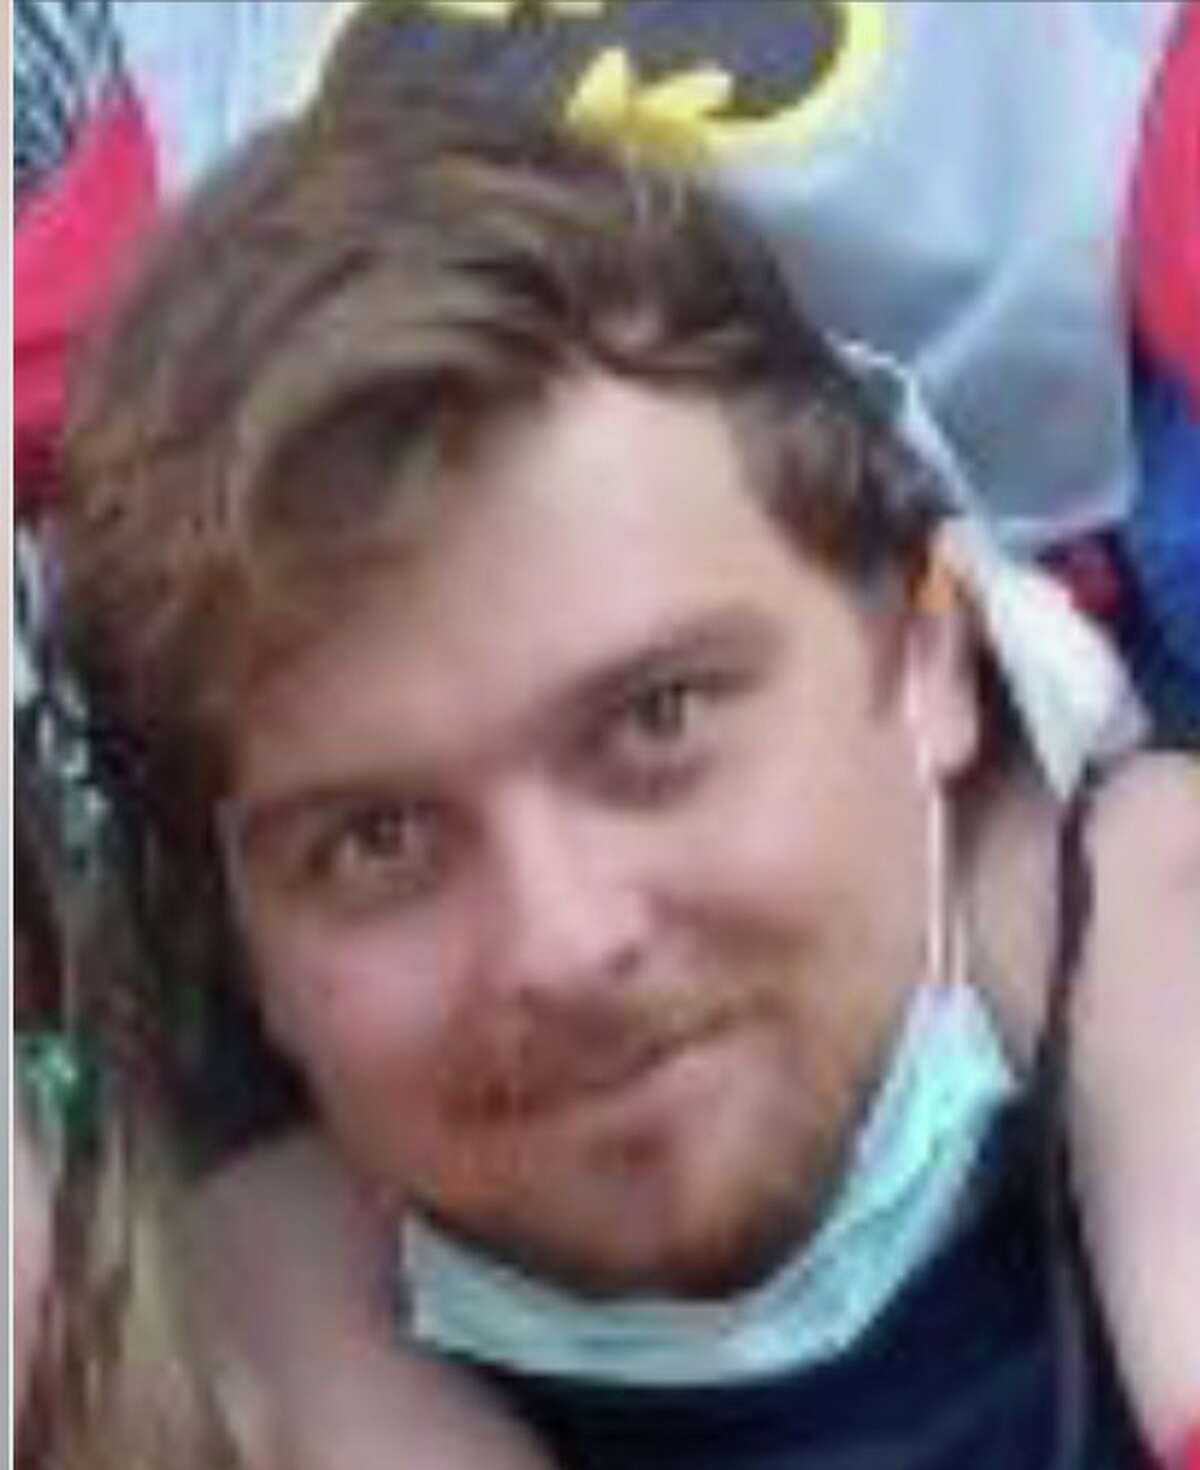 Ridge Kyle Cole, visiting Houston from Oklahoma, has been missing since Friday. 